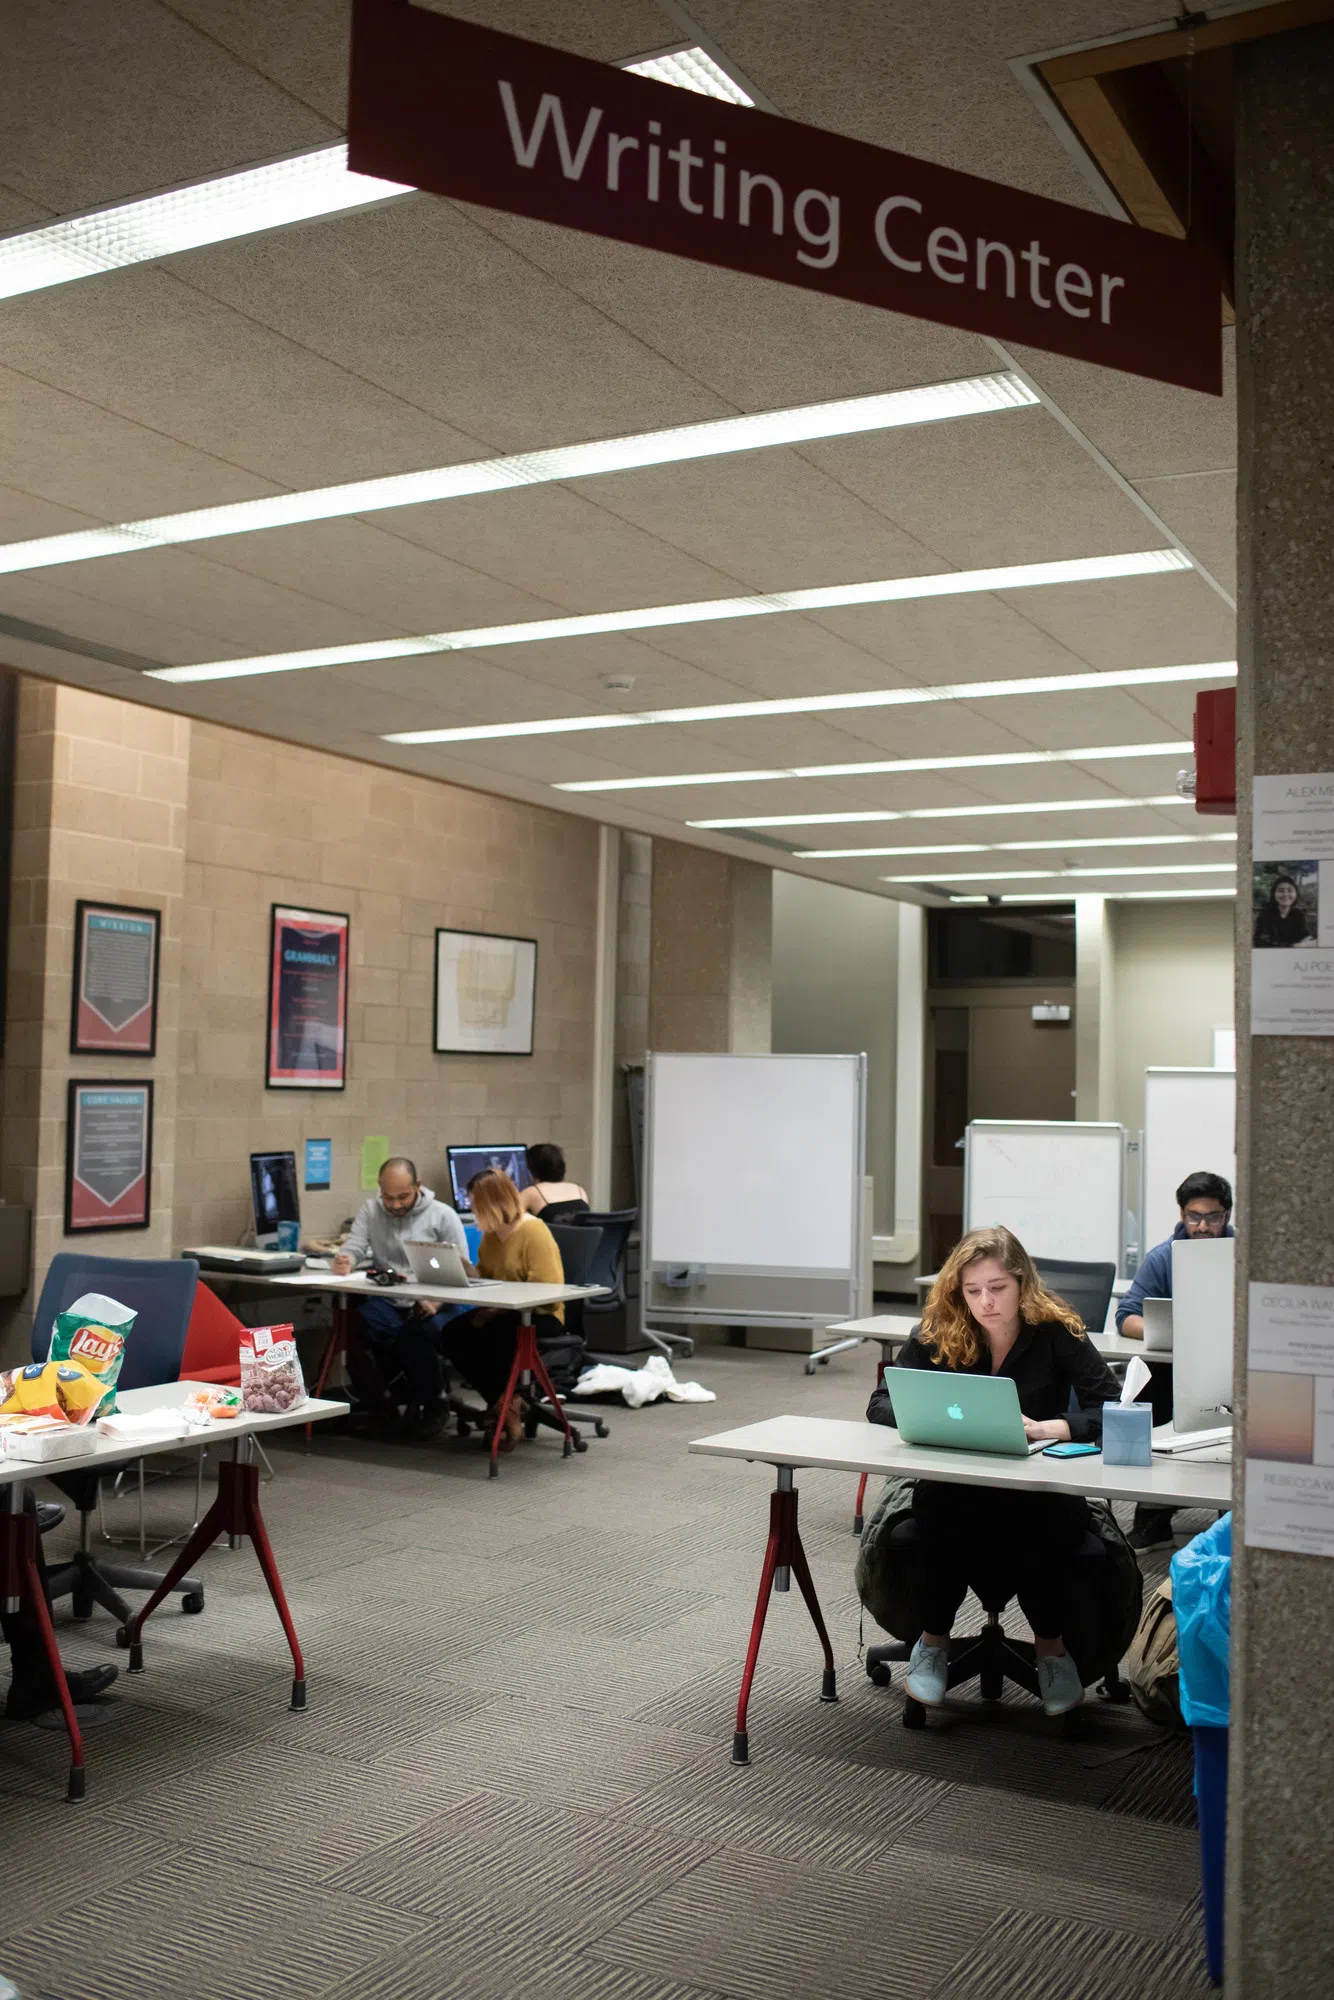 Students sit at desks in a big, well-lit room with whiteboards.